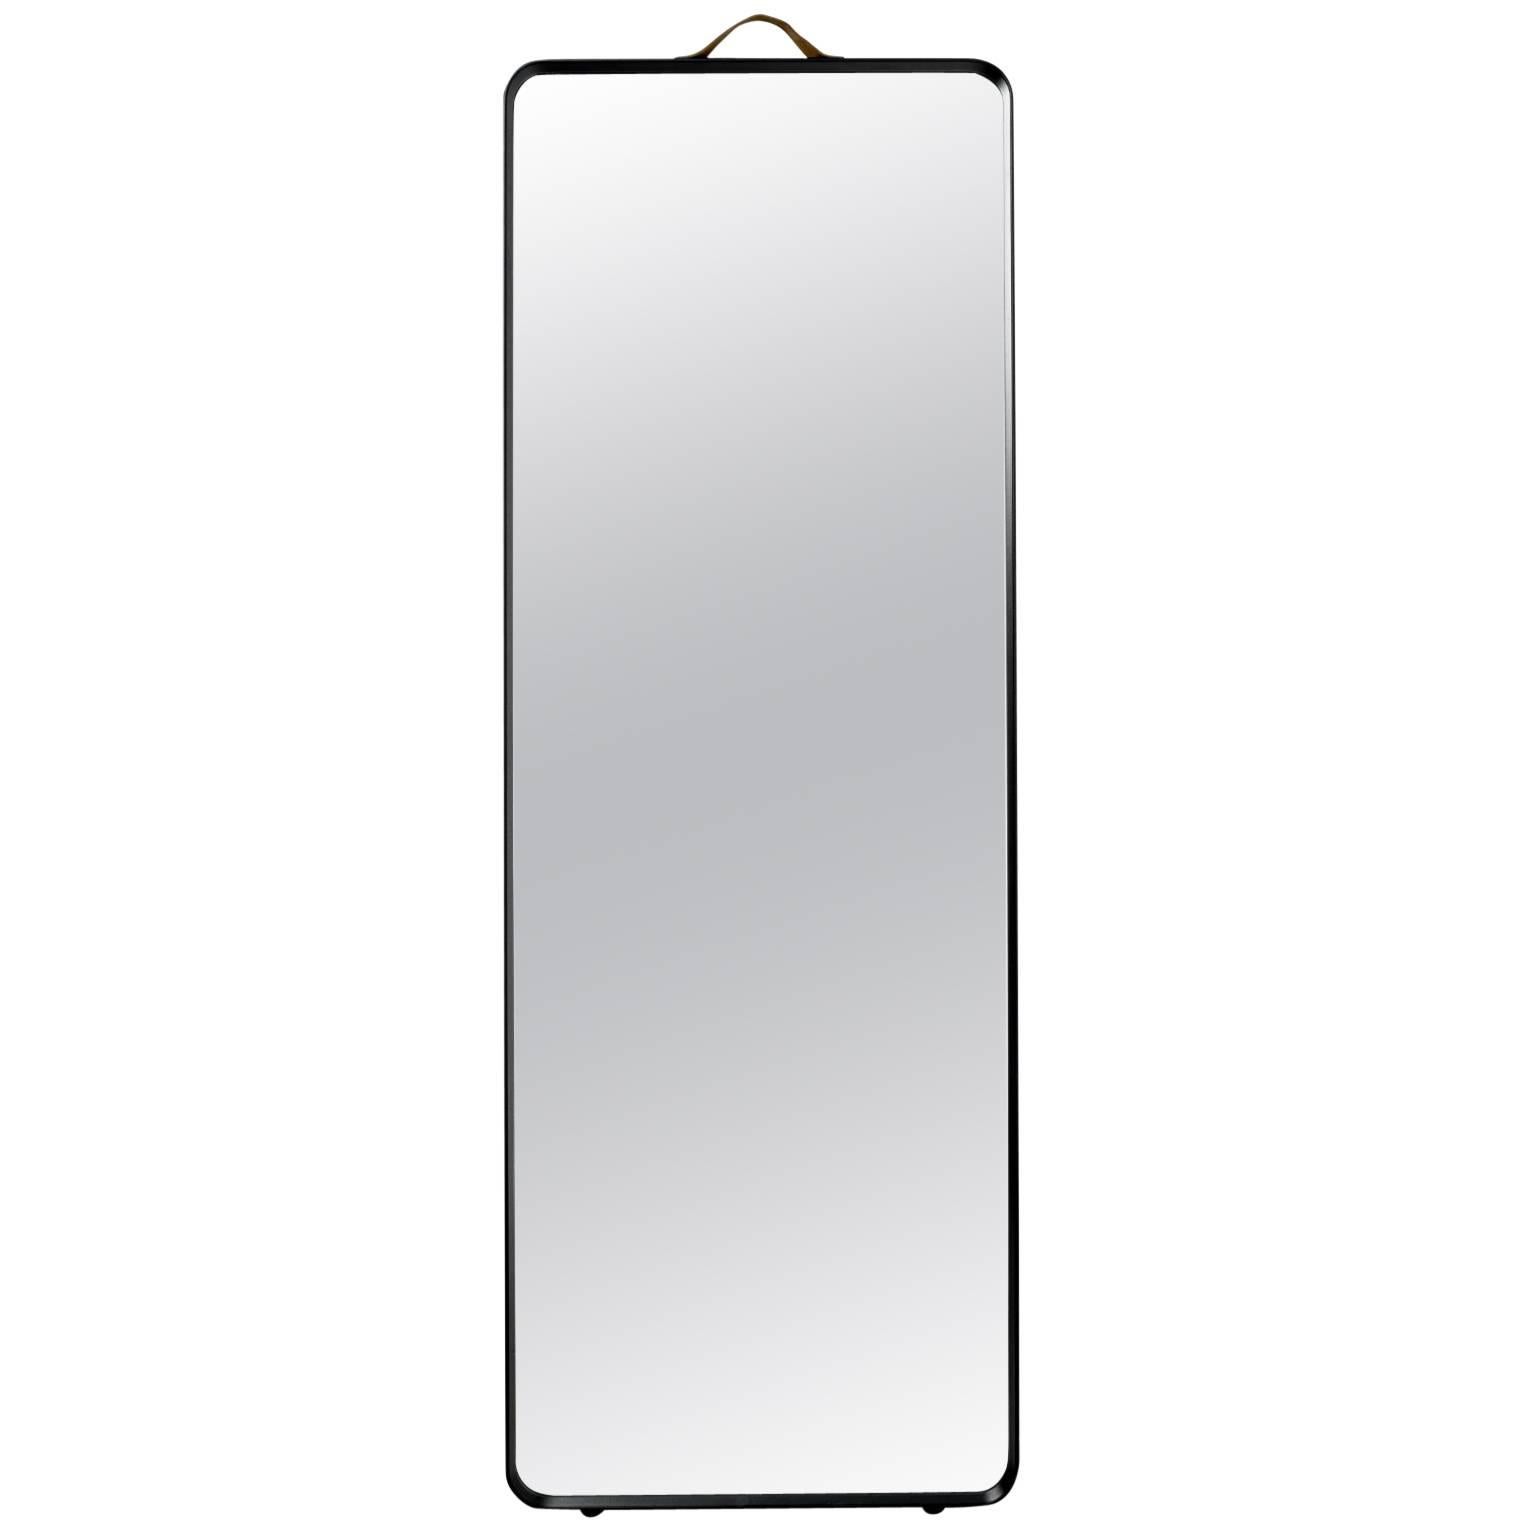 Rectangular Floor Mirror by Norm Architects, Black For Sale